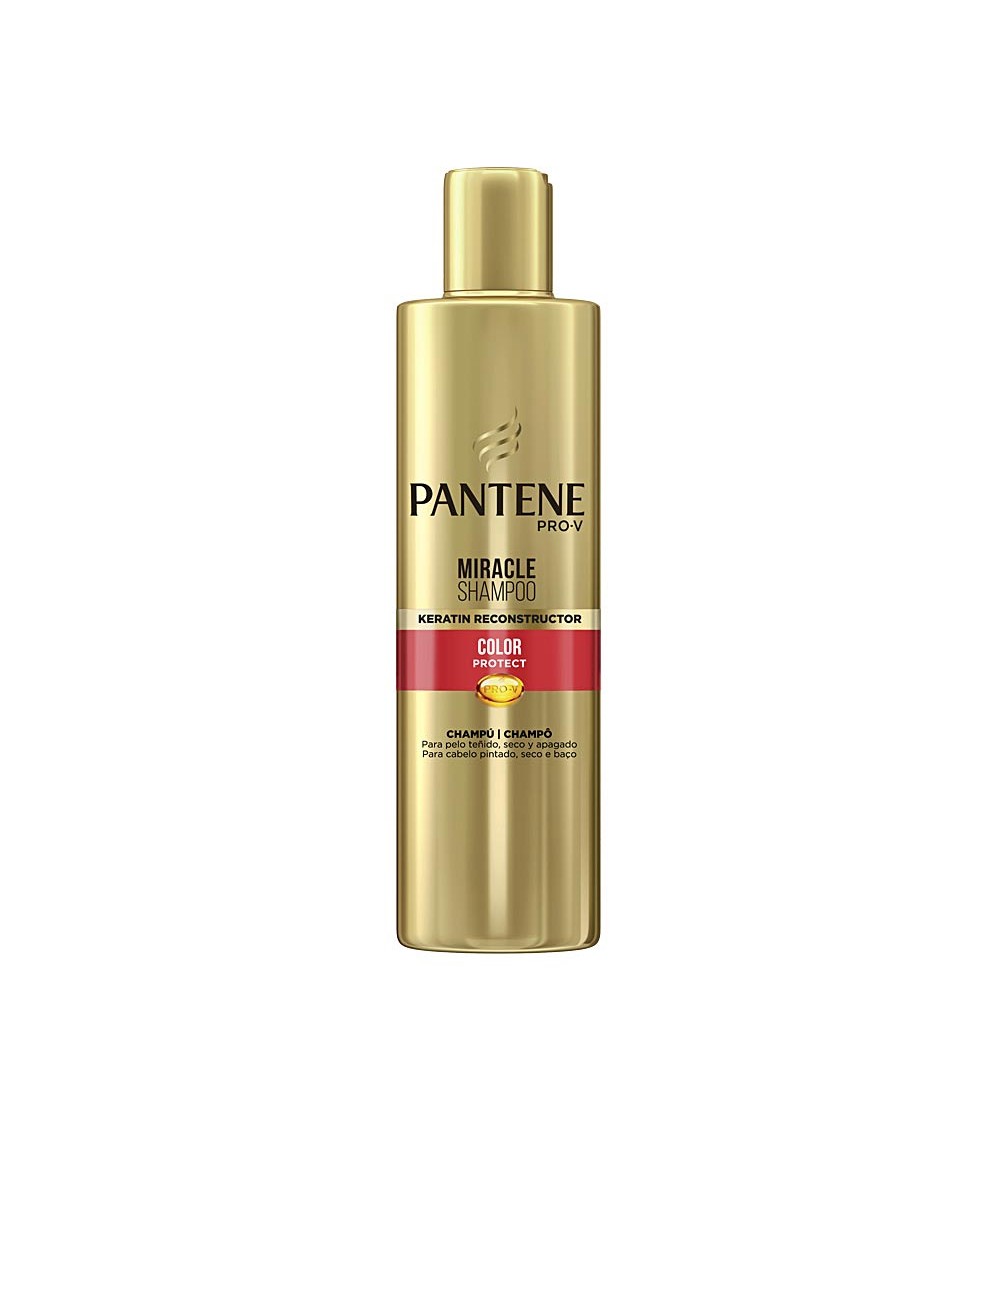 MIRACLE shampooing PROTECTION DES COULEURS 270 ml